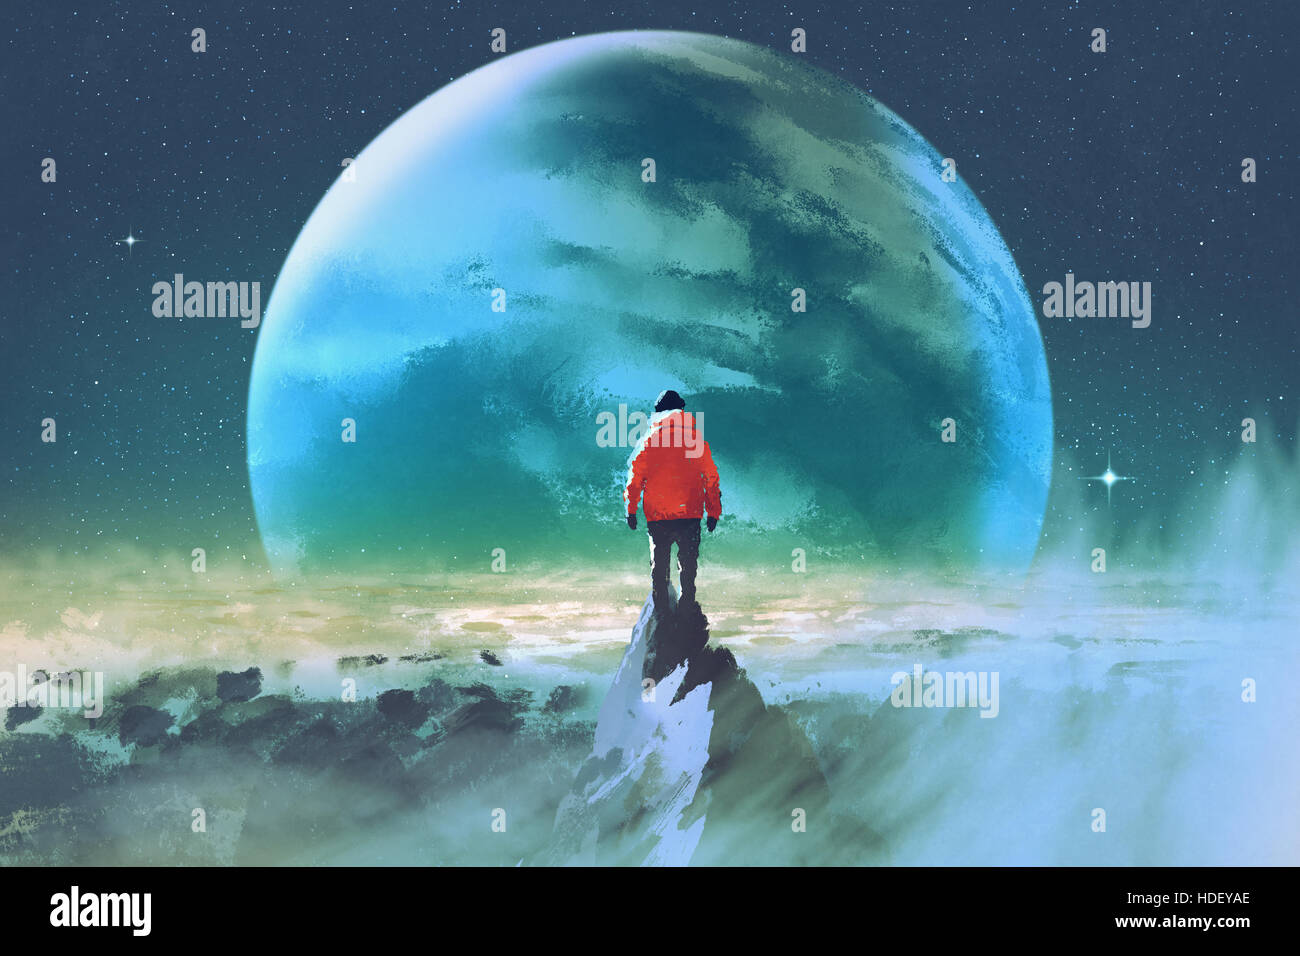 man on top of mountain looking at another planet,illustration painting Stock Photo